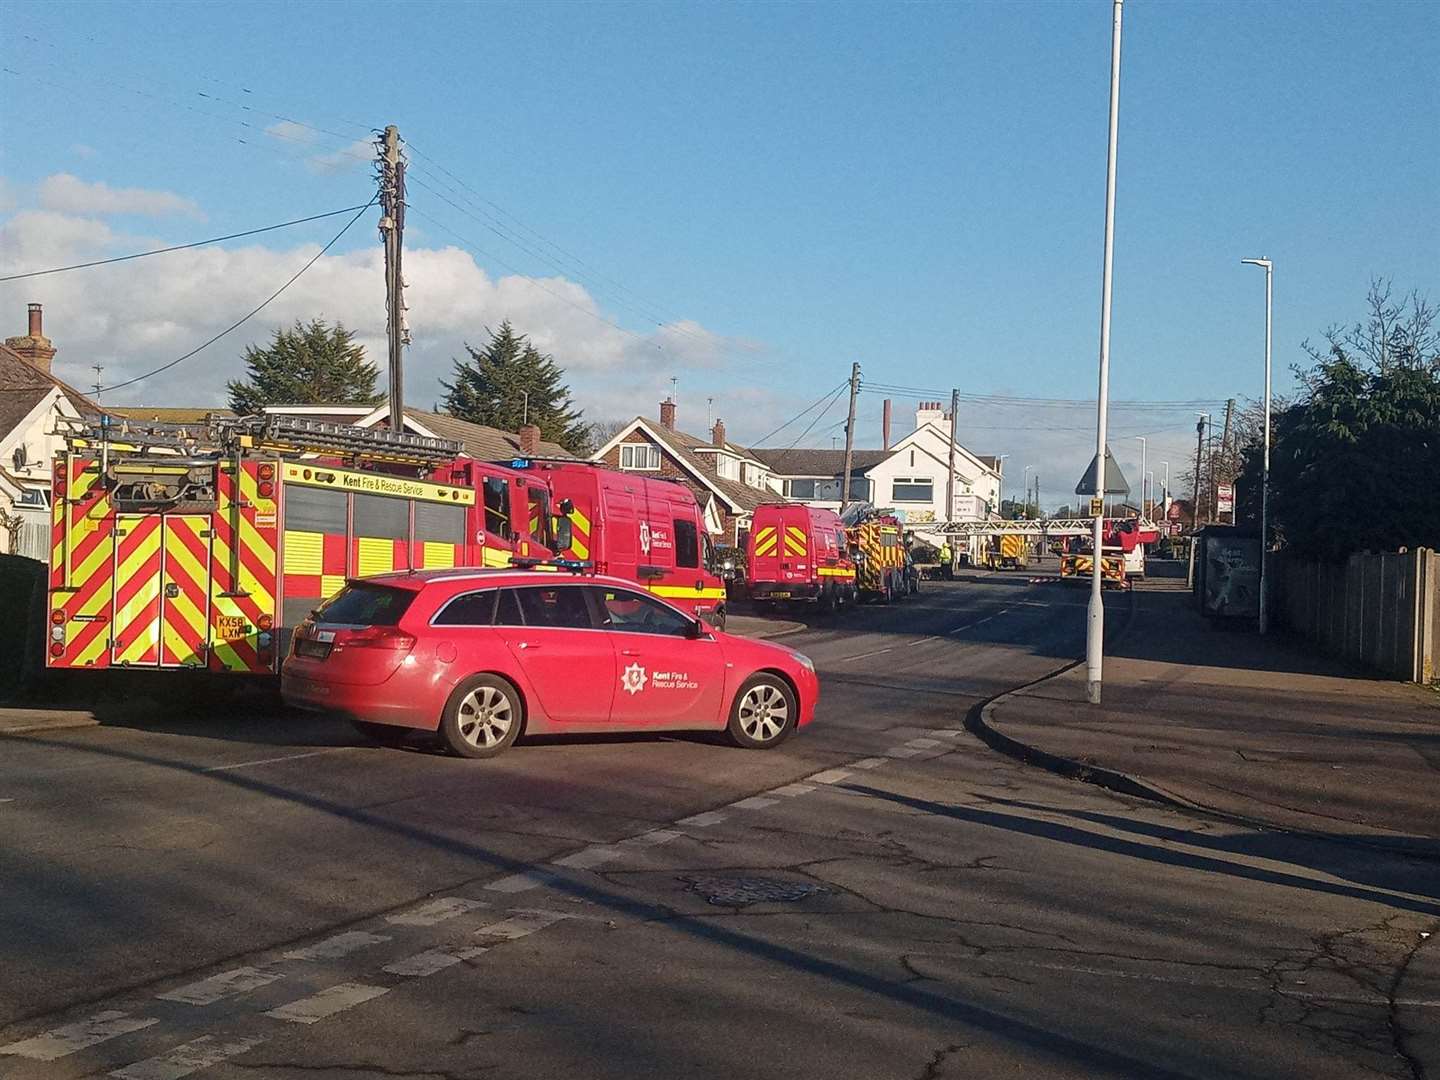 Minster Road on the Isle of Sheppey was closed while a crane from Kent Fire and Rescue was used during a medical incident. Picture: Steve Harding